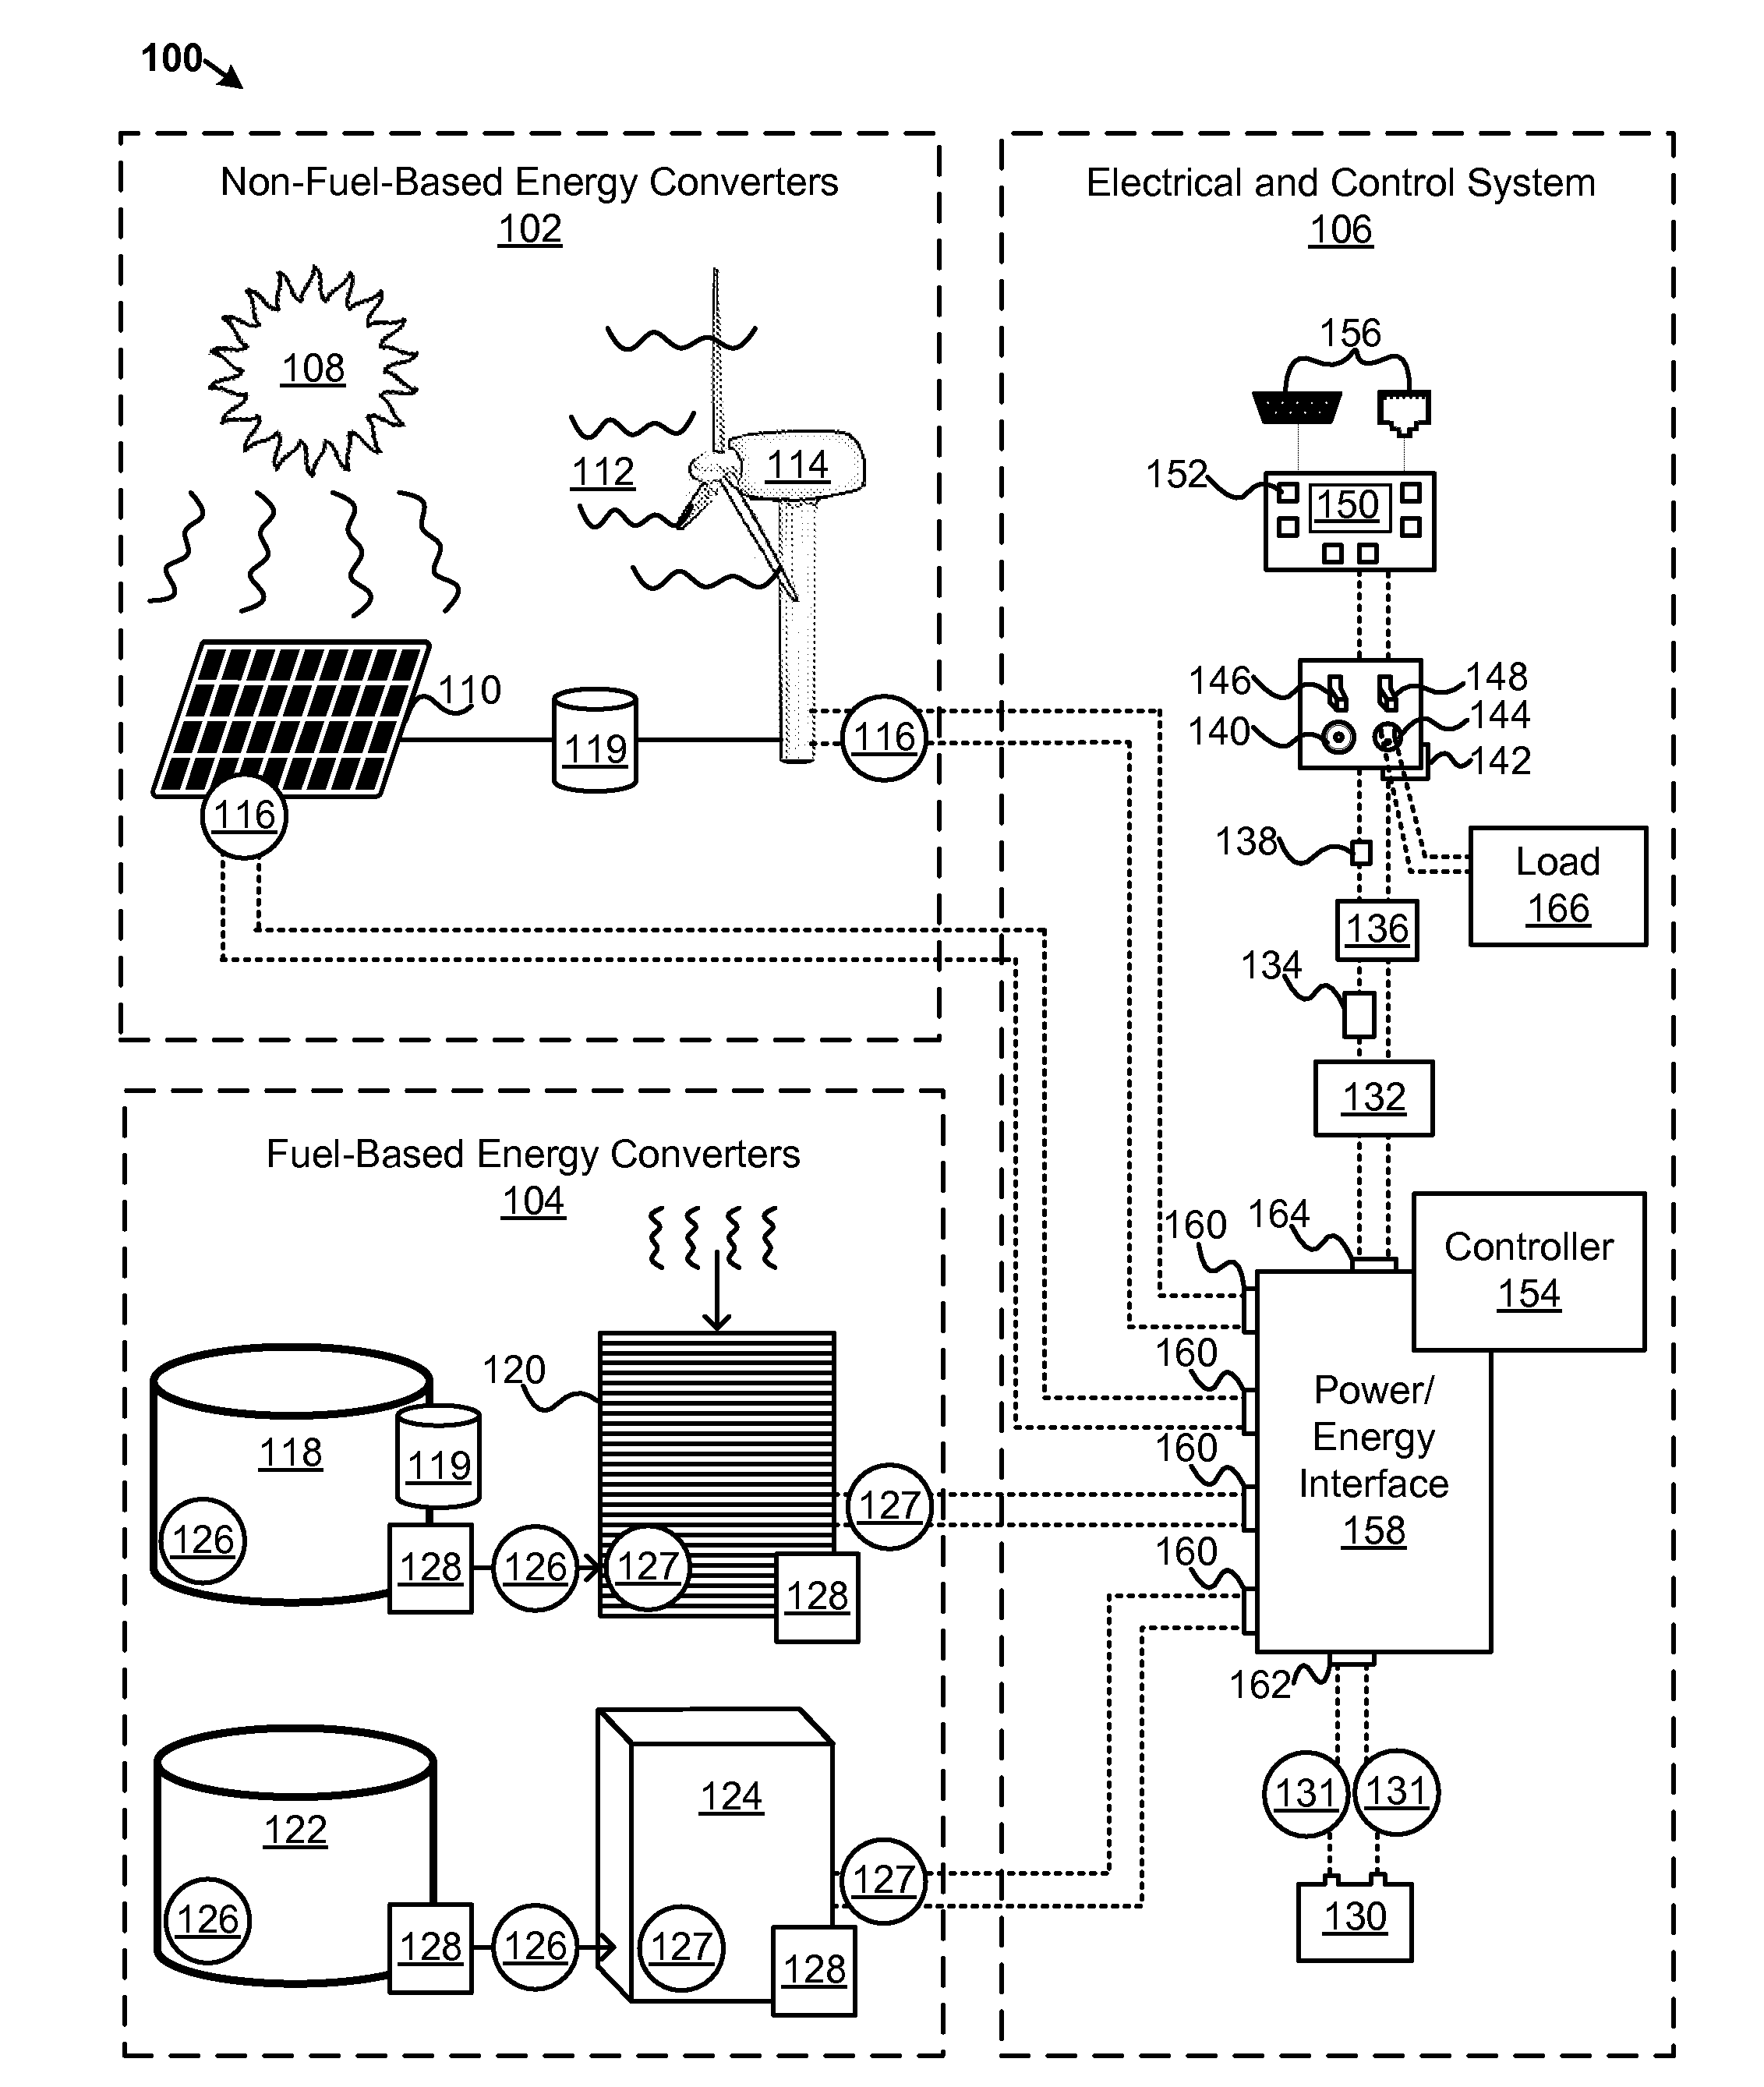 Apparatus, system, and method to manage the generation and use of hybrid electric power